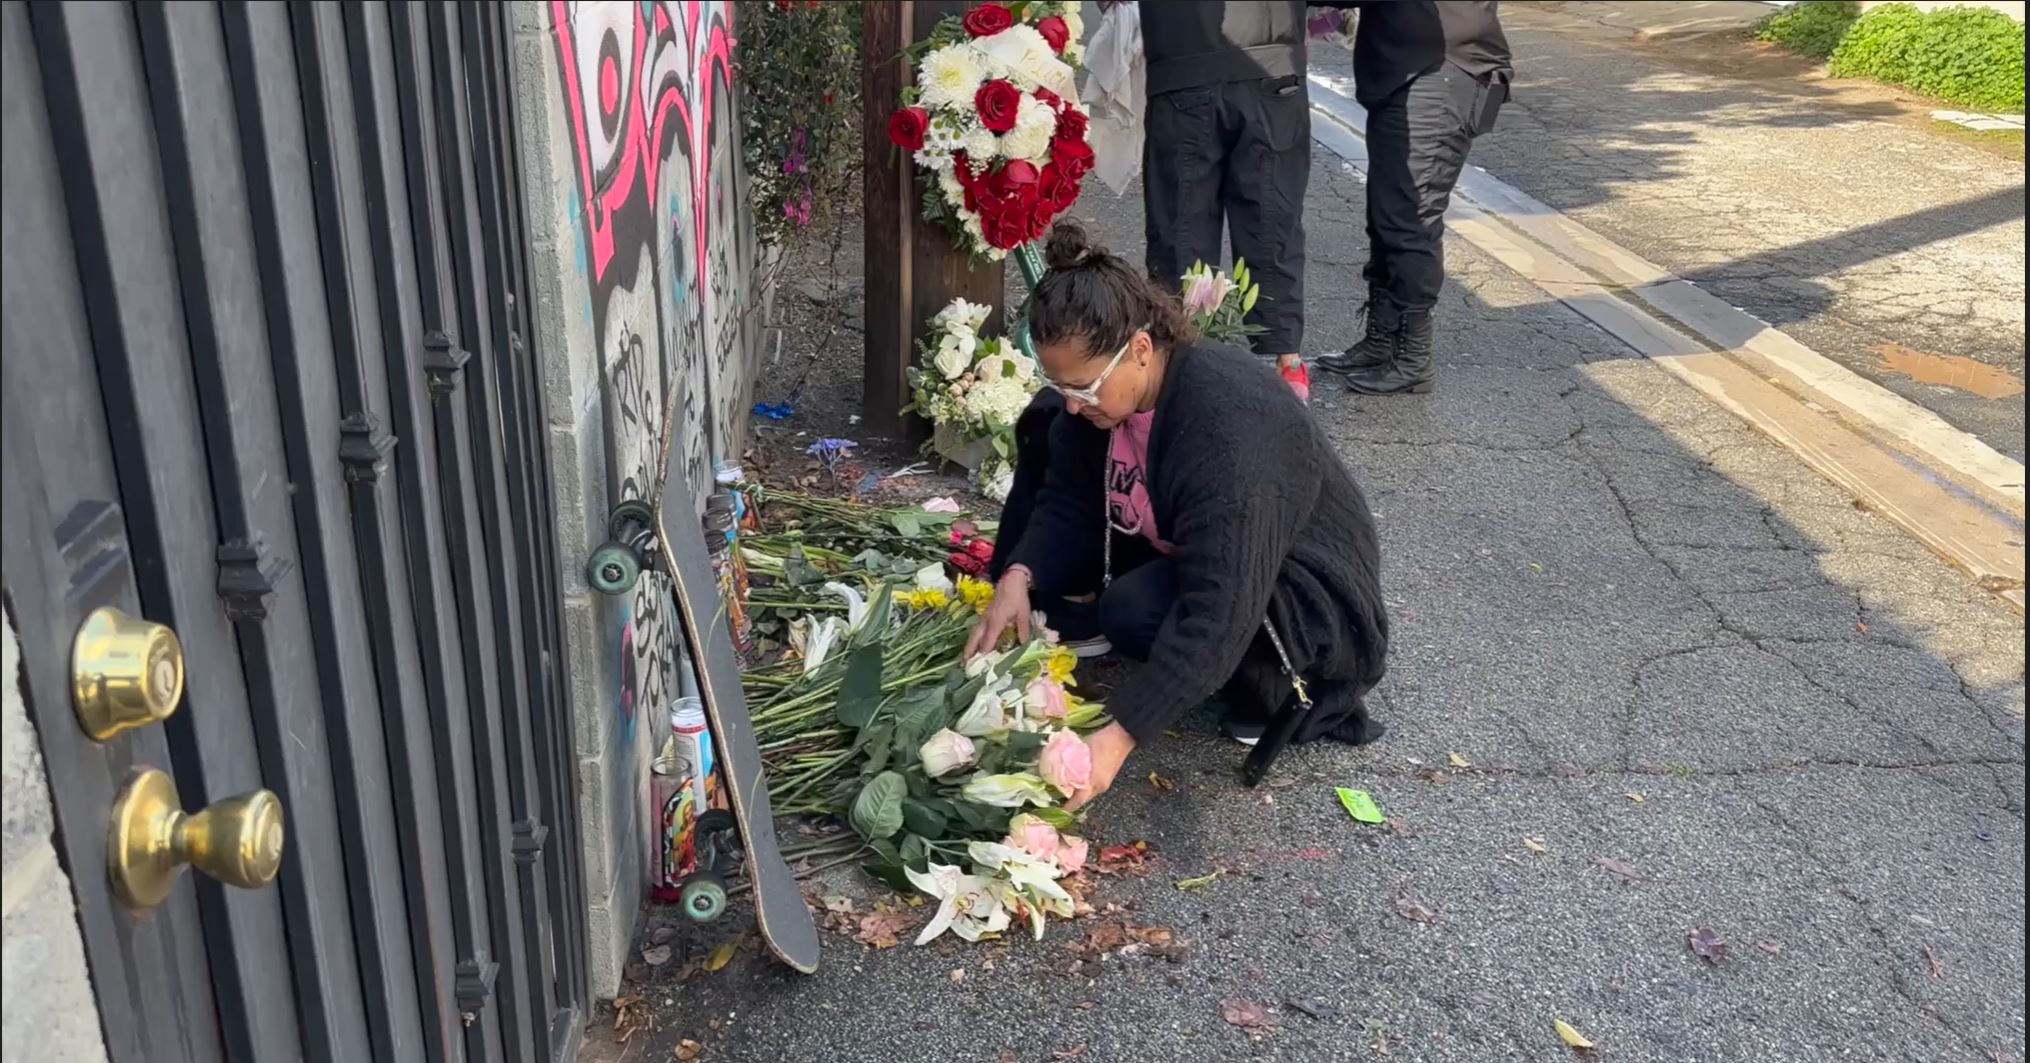 Grieving Mother Seeks Answers After LA Garbage Truck Kills Her Son